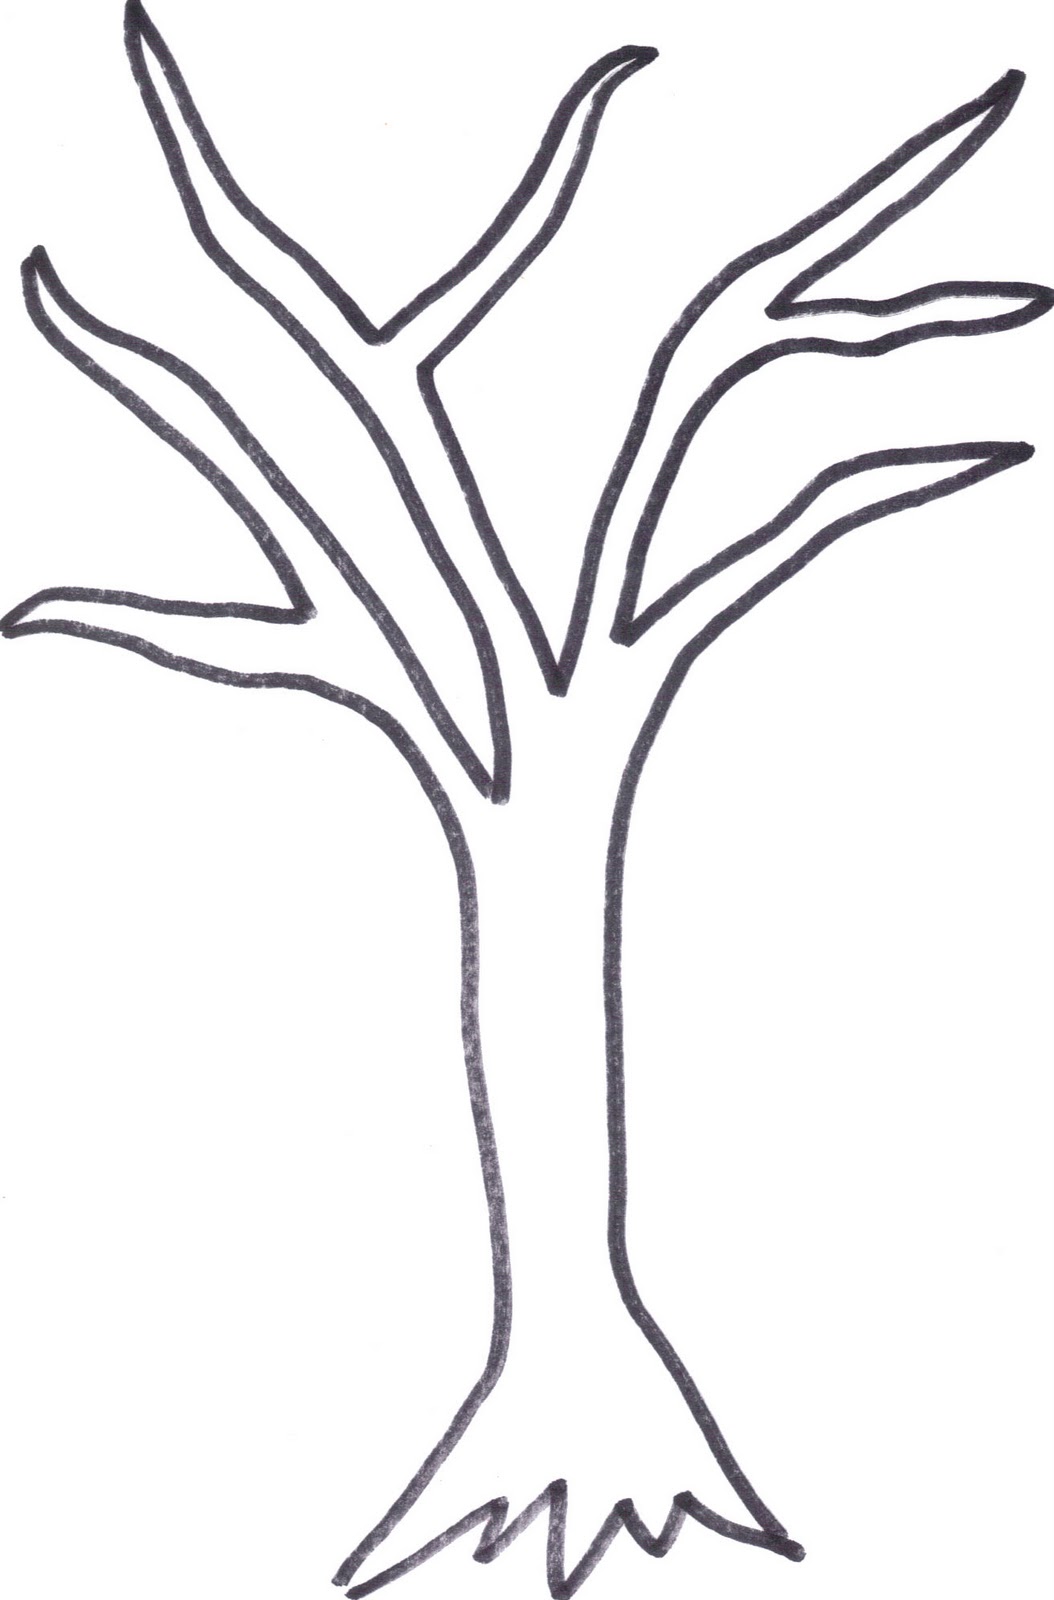 Here Is The Tree Outline If Anyone Wants To Cut It Out Or Print It Out